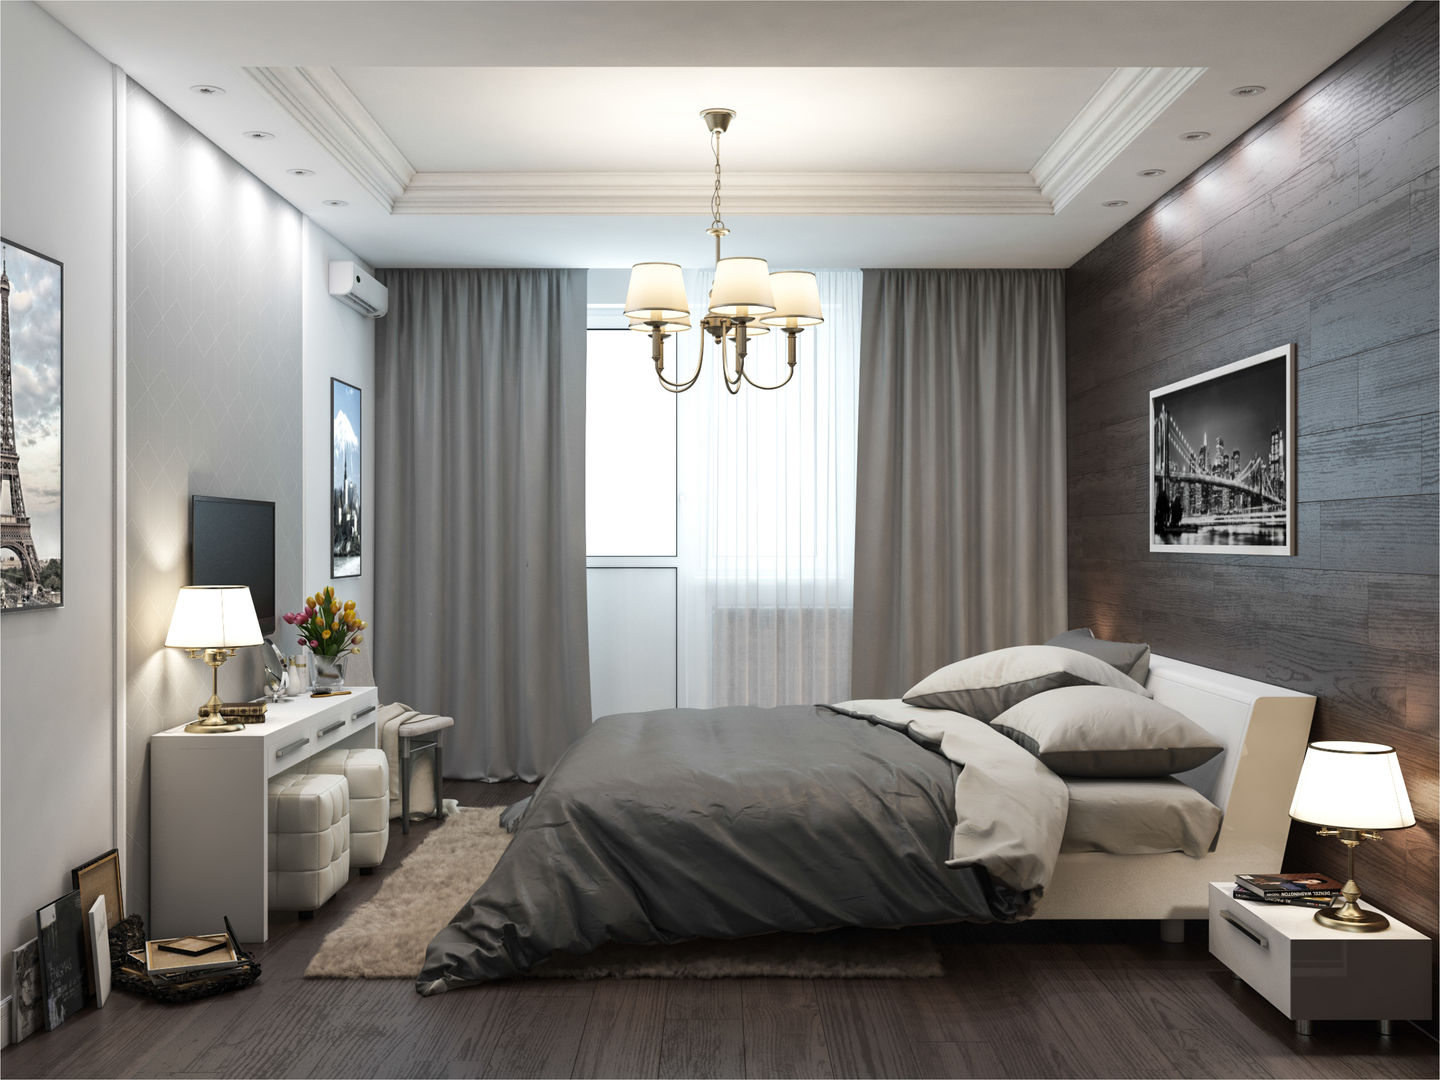 Private apartments|Частная квартира площадью 72 кв.м., Rosso Rosso Modern style bedroom